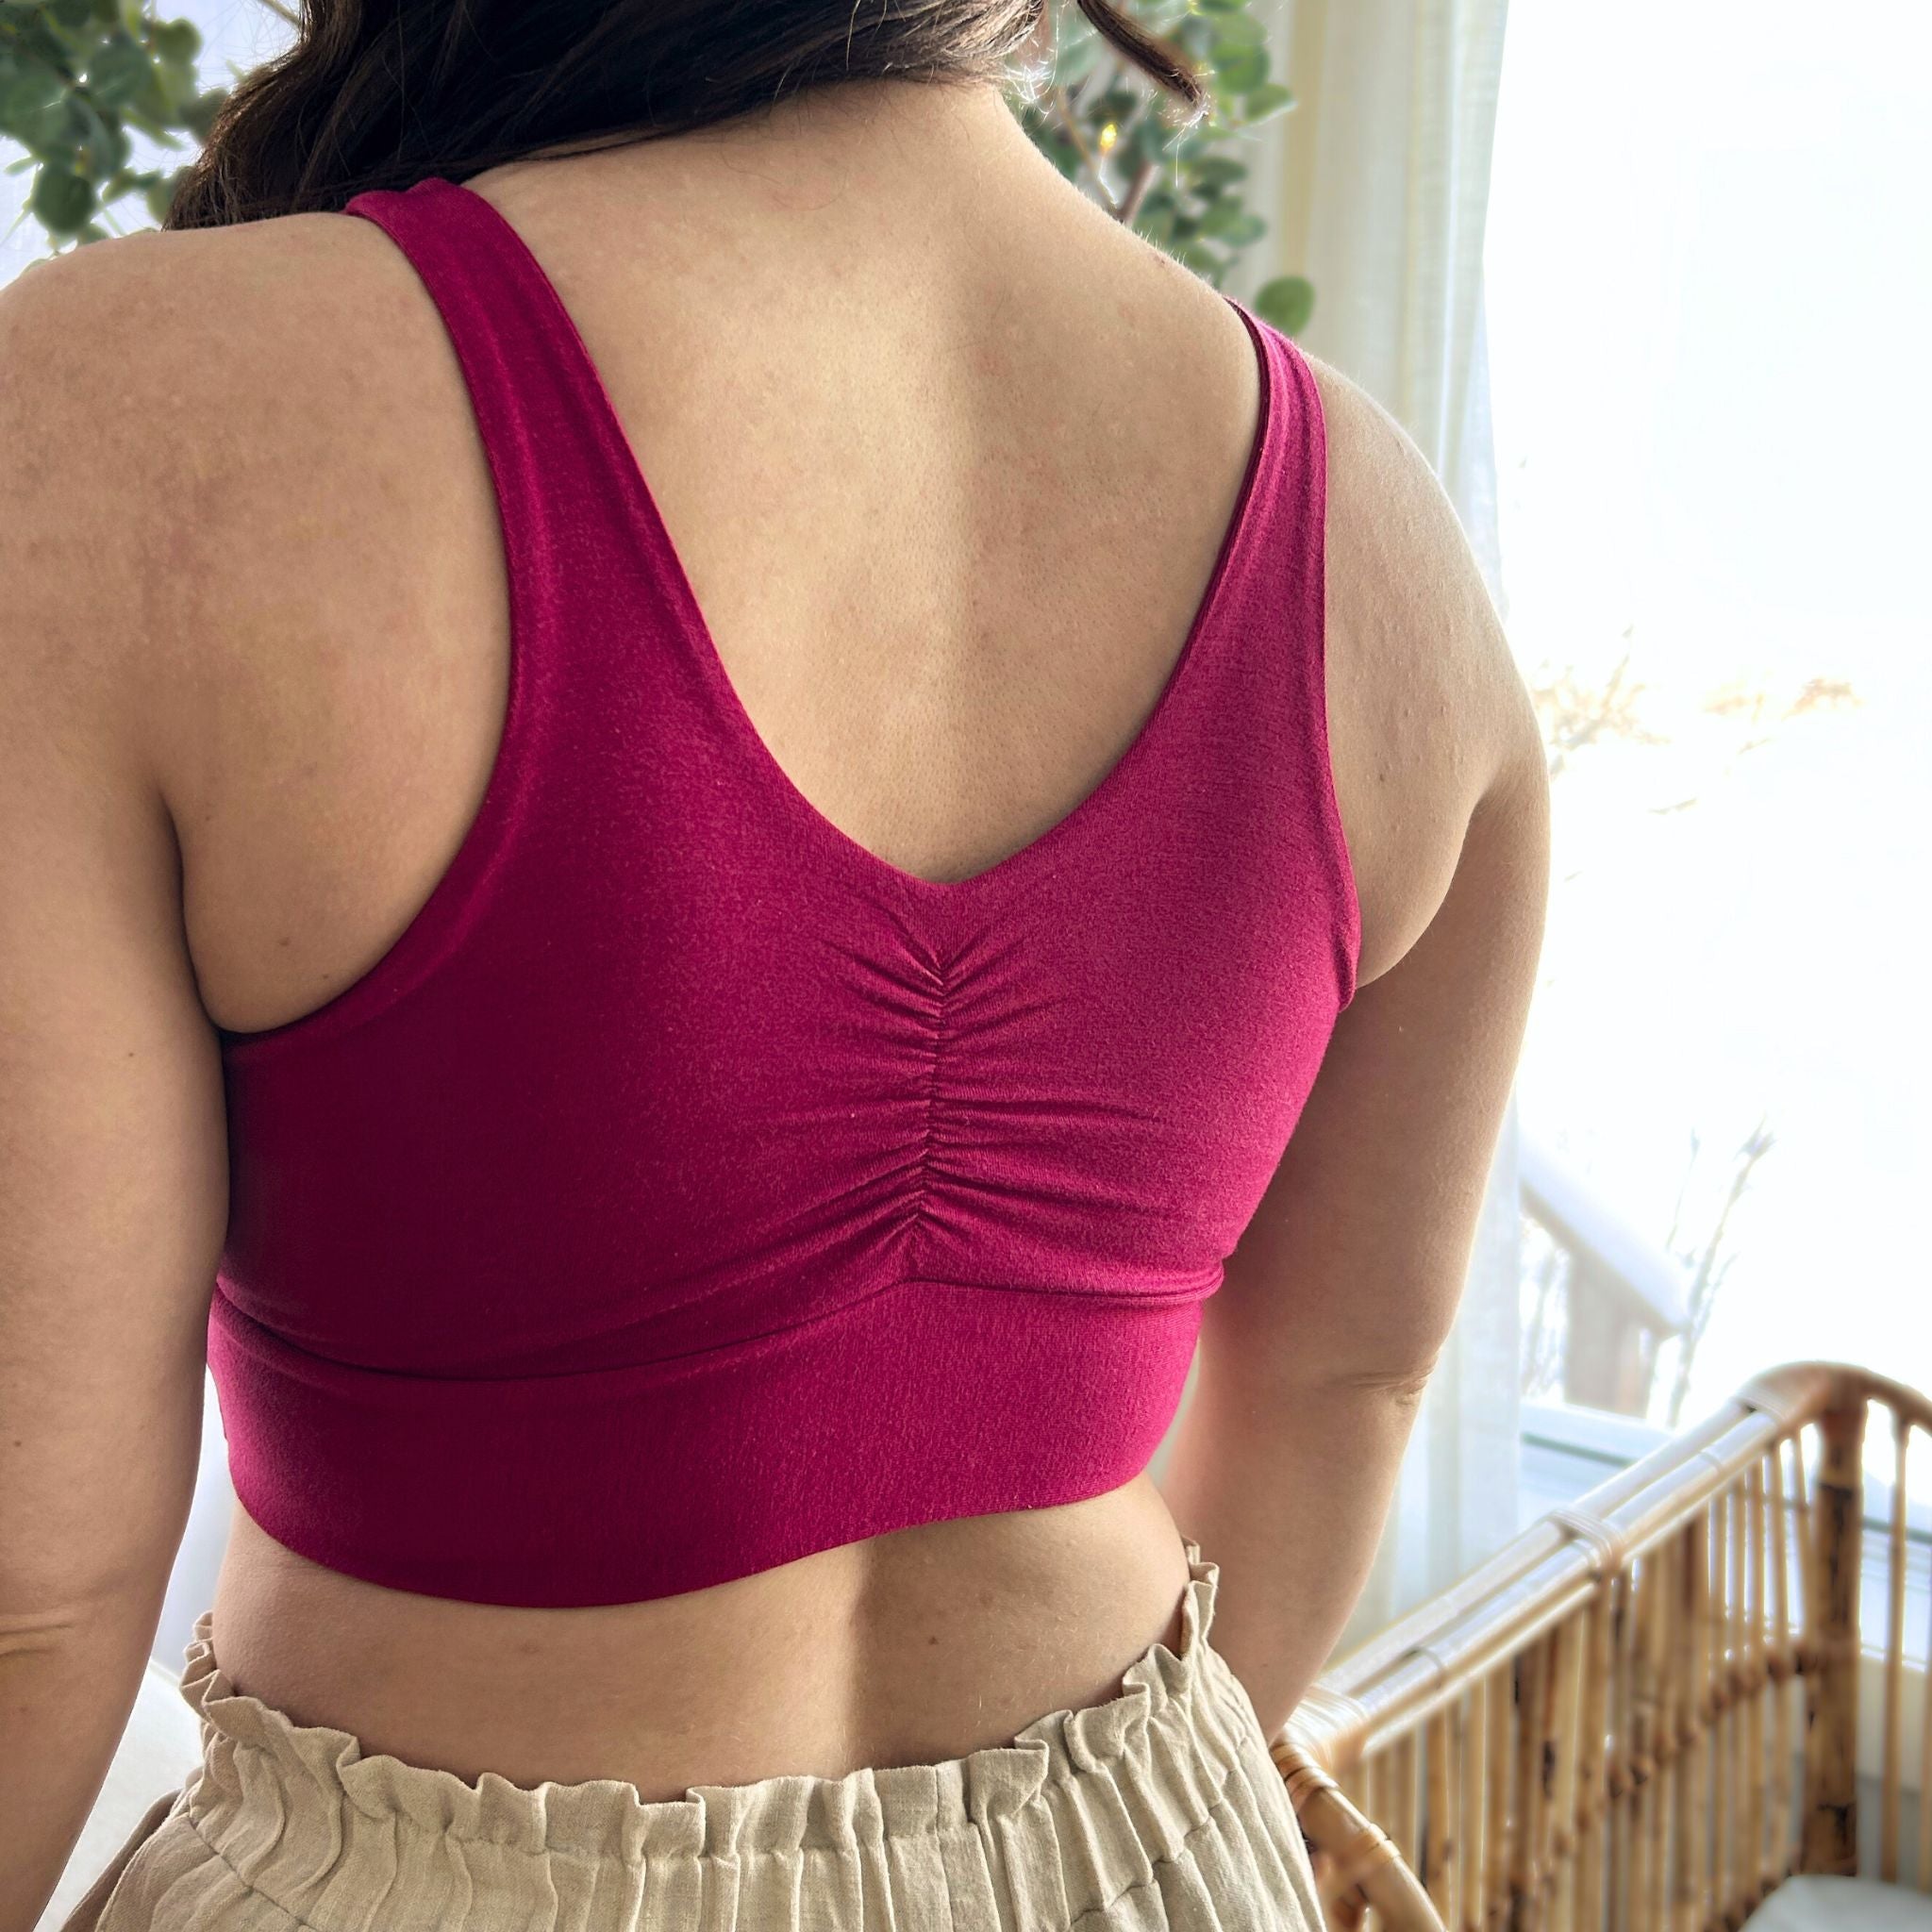 Light and airy is how you'll be feeling in our Cotton Essentials Crossover  Bra! Featuring easy pull-over styling and wire-free stretch…